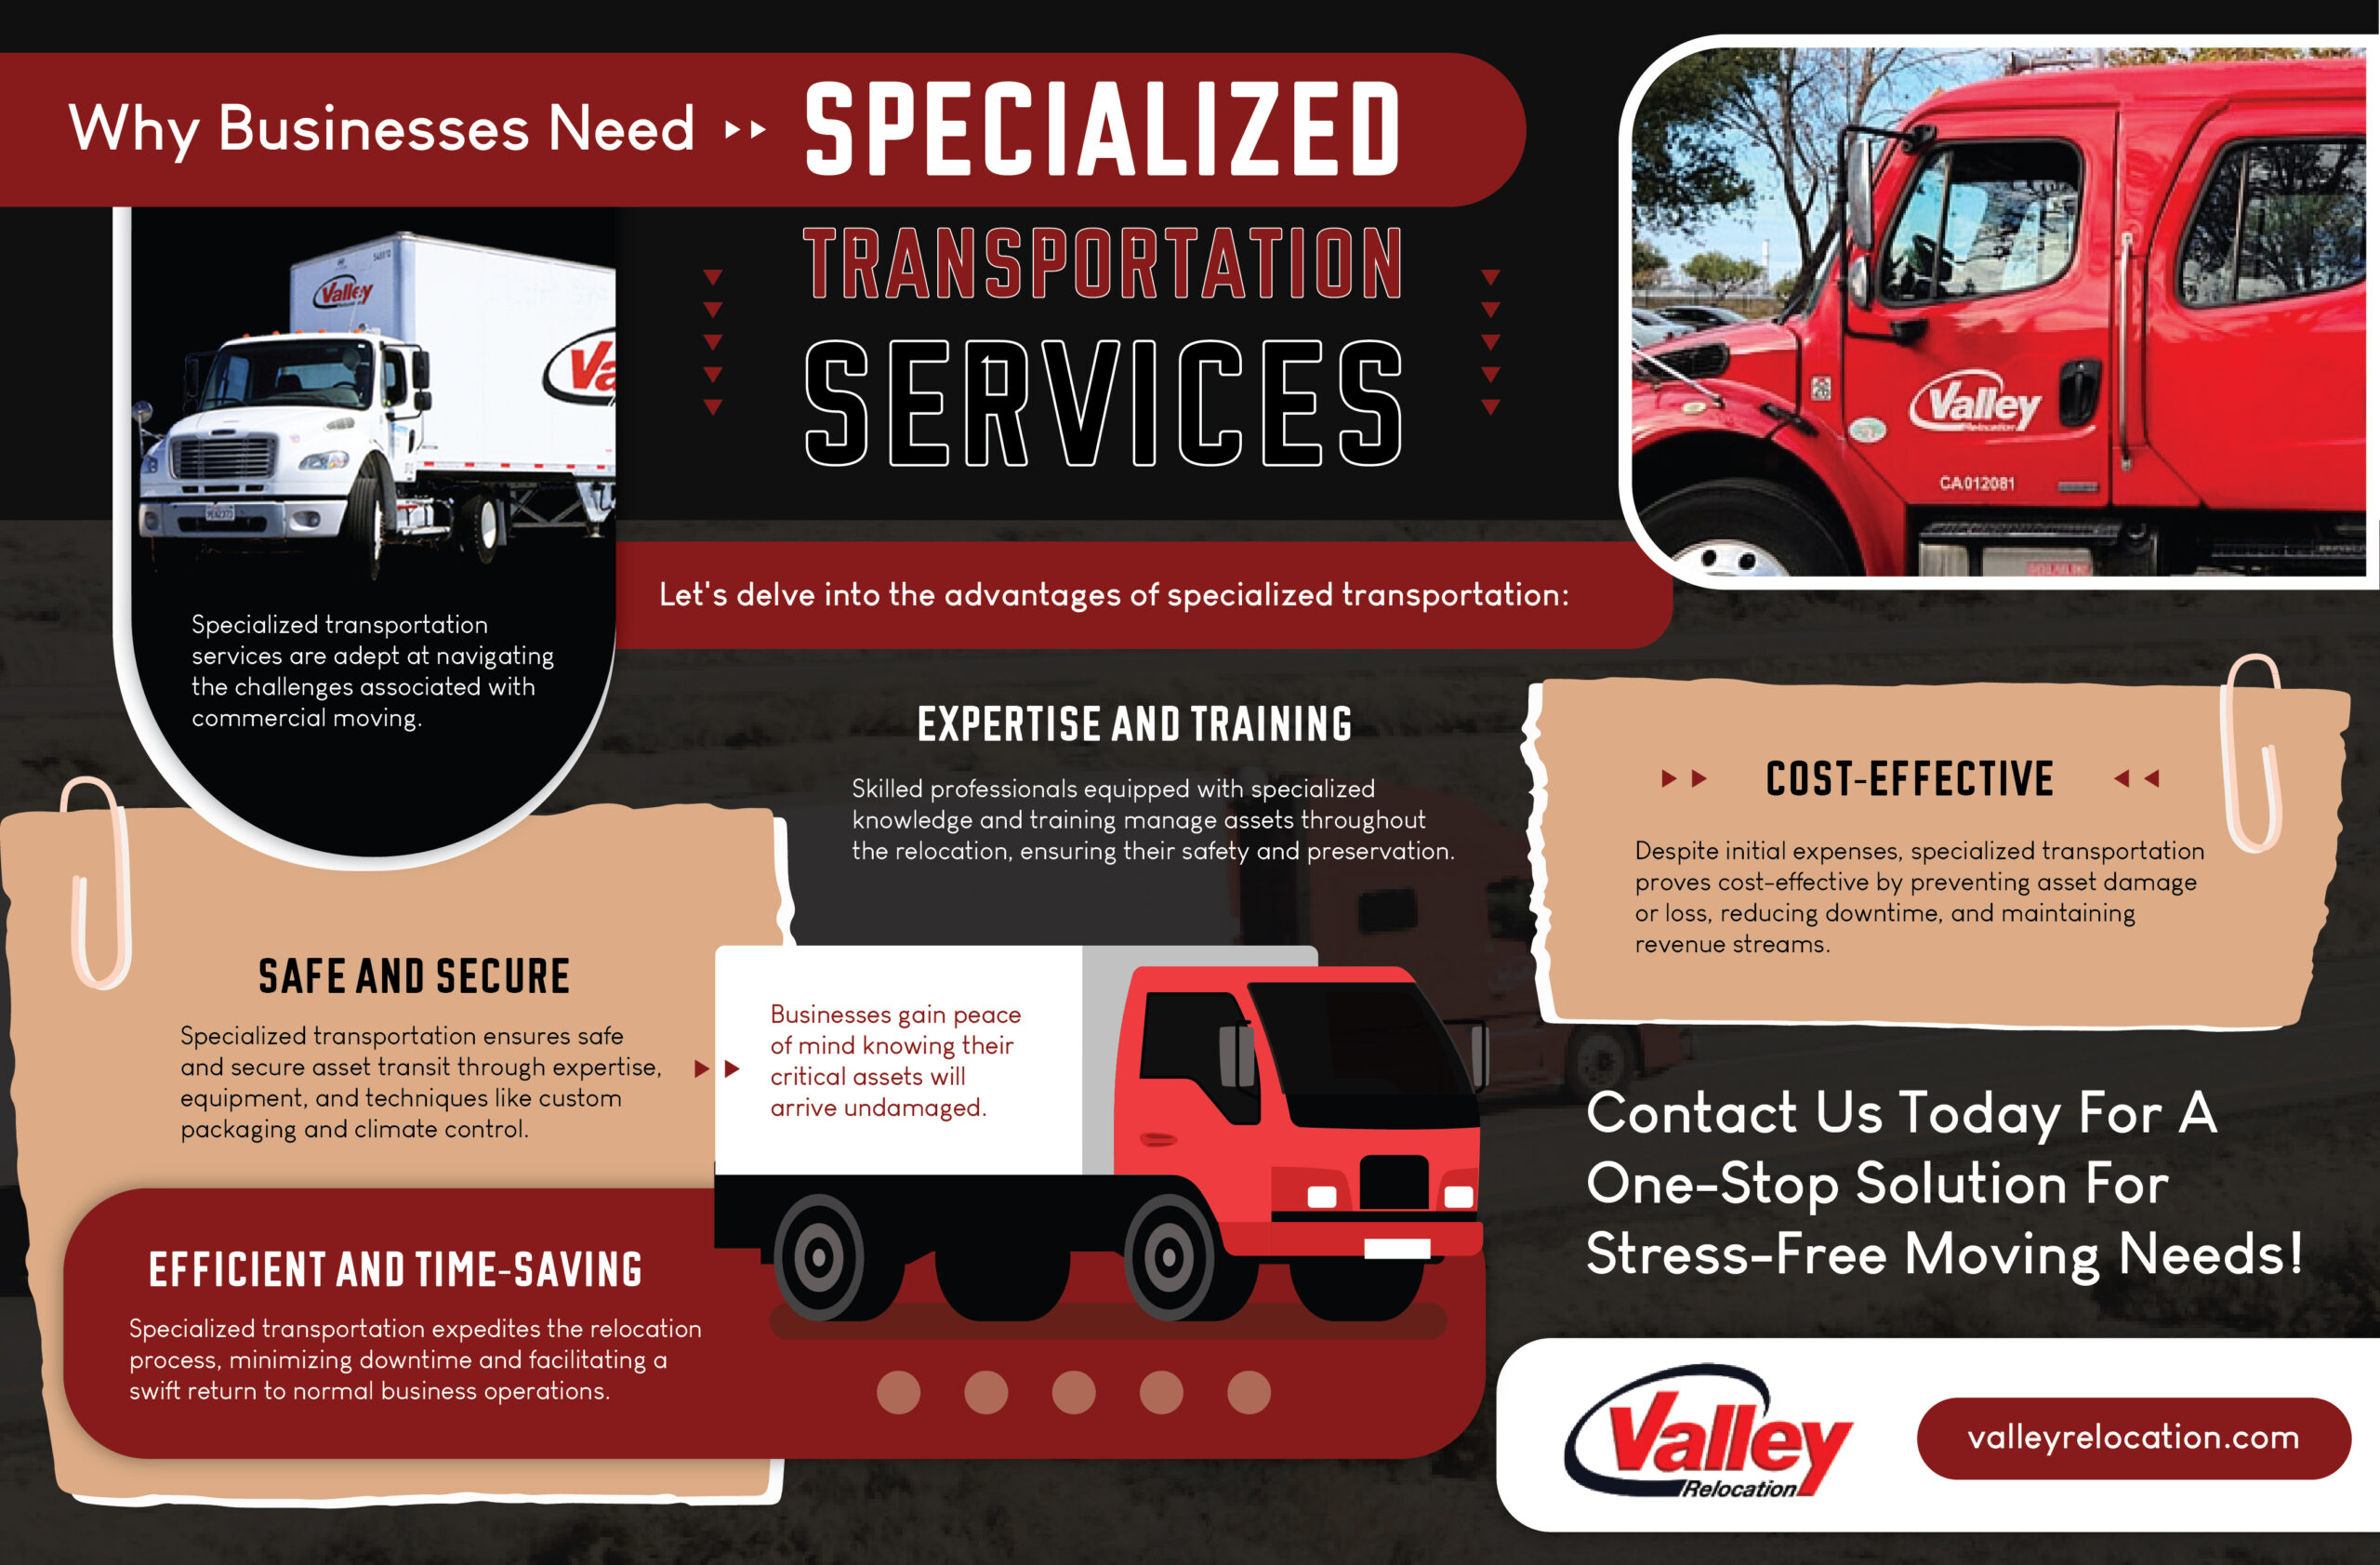 Why Businesses Need Specialized Transportation Services 